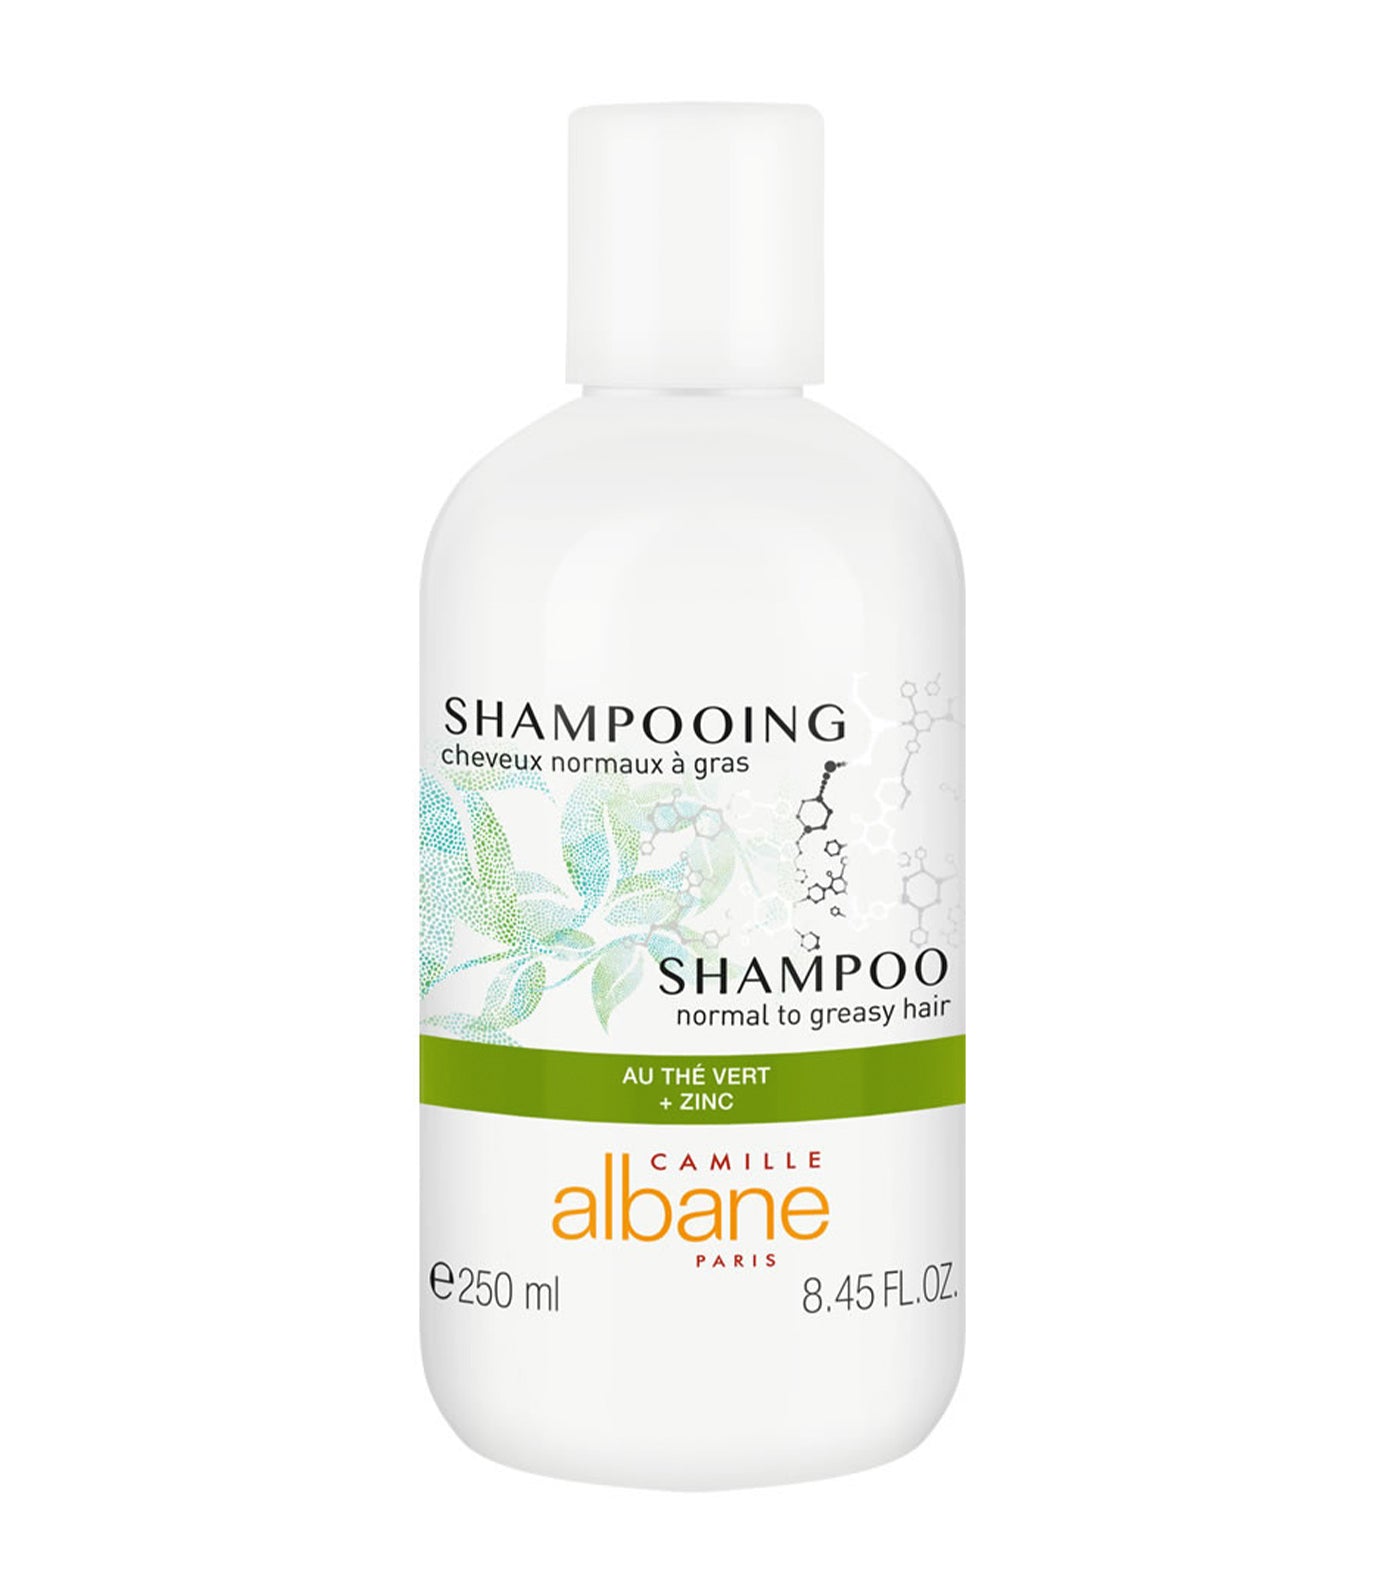 Shampoo For Normal To Oily Hair - With Green Tea + Zinc